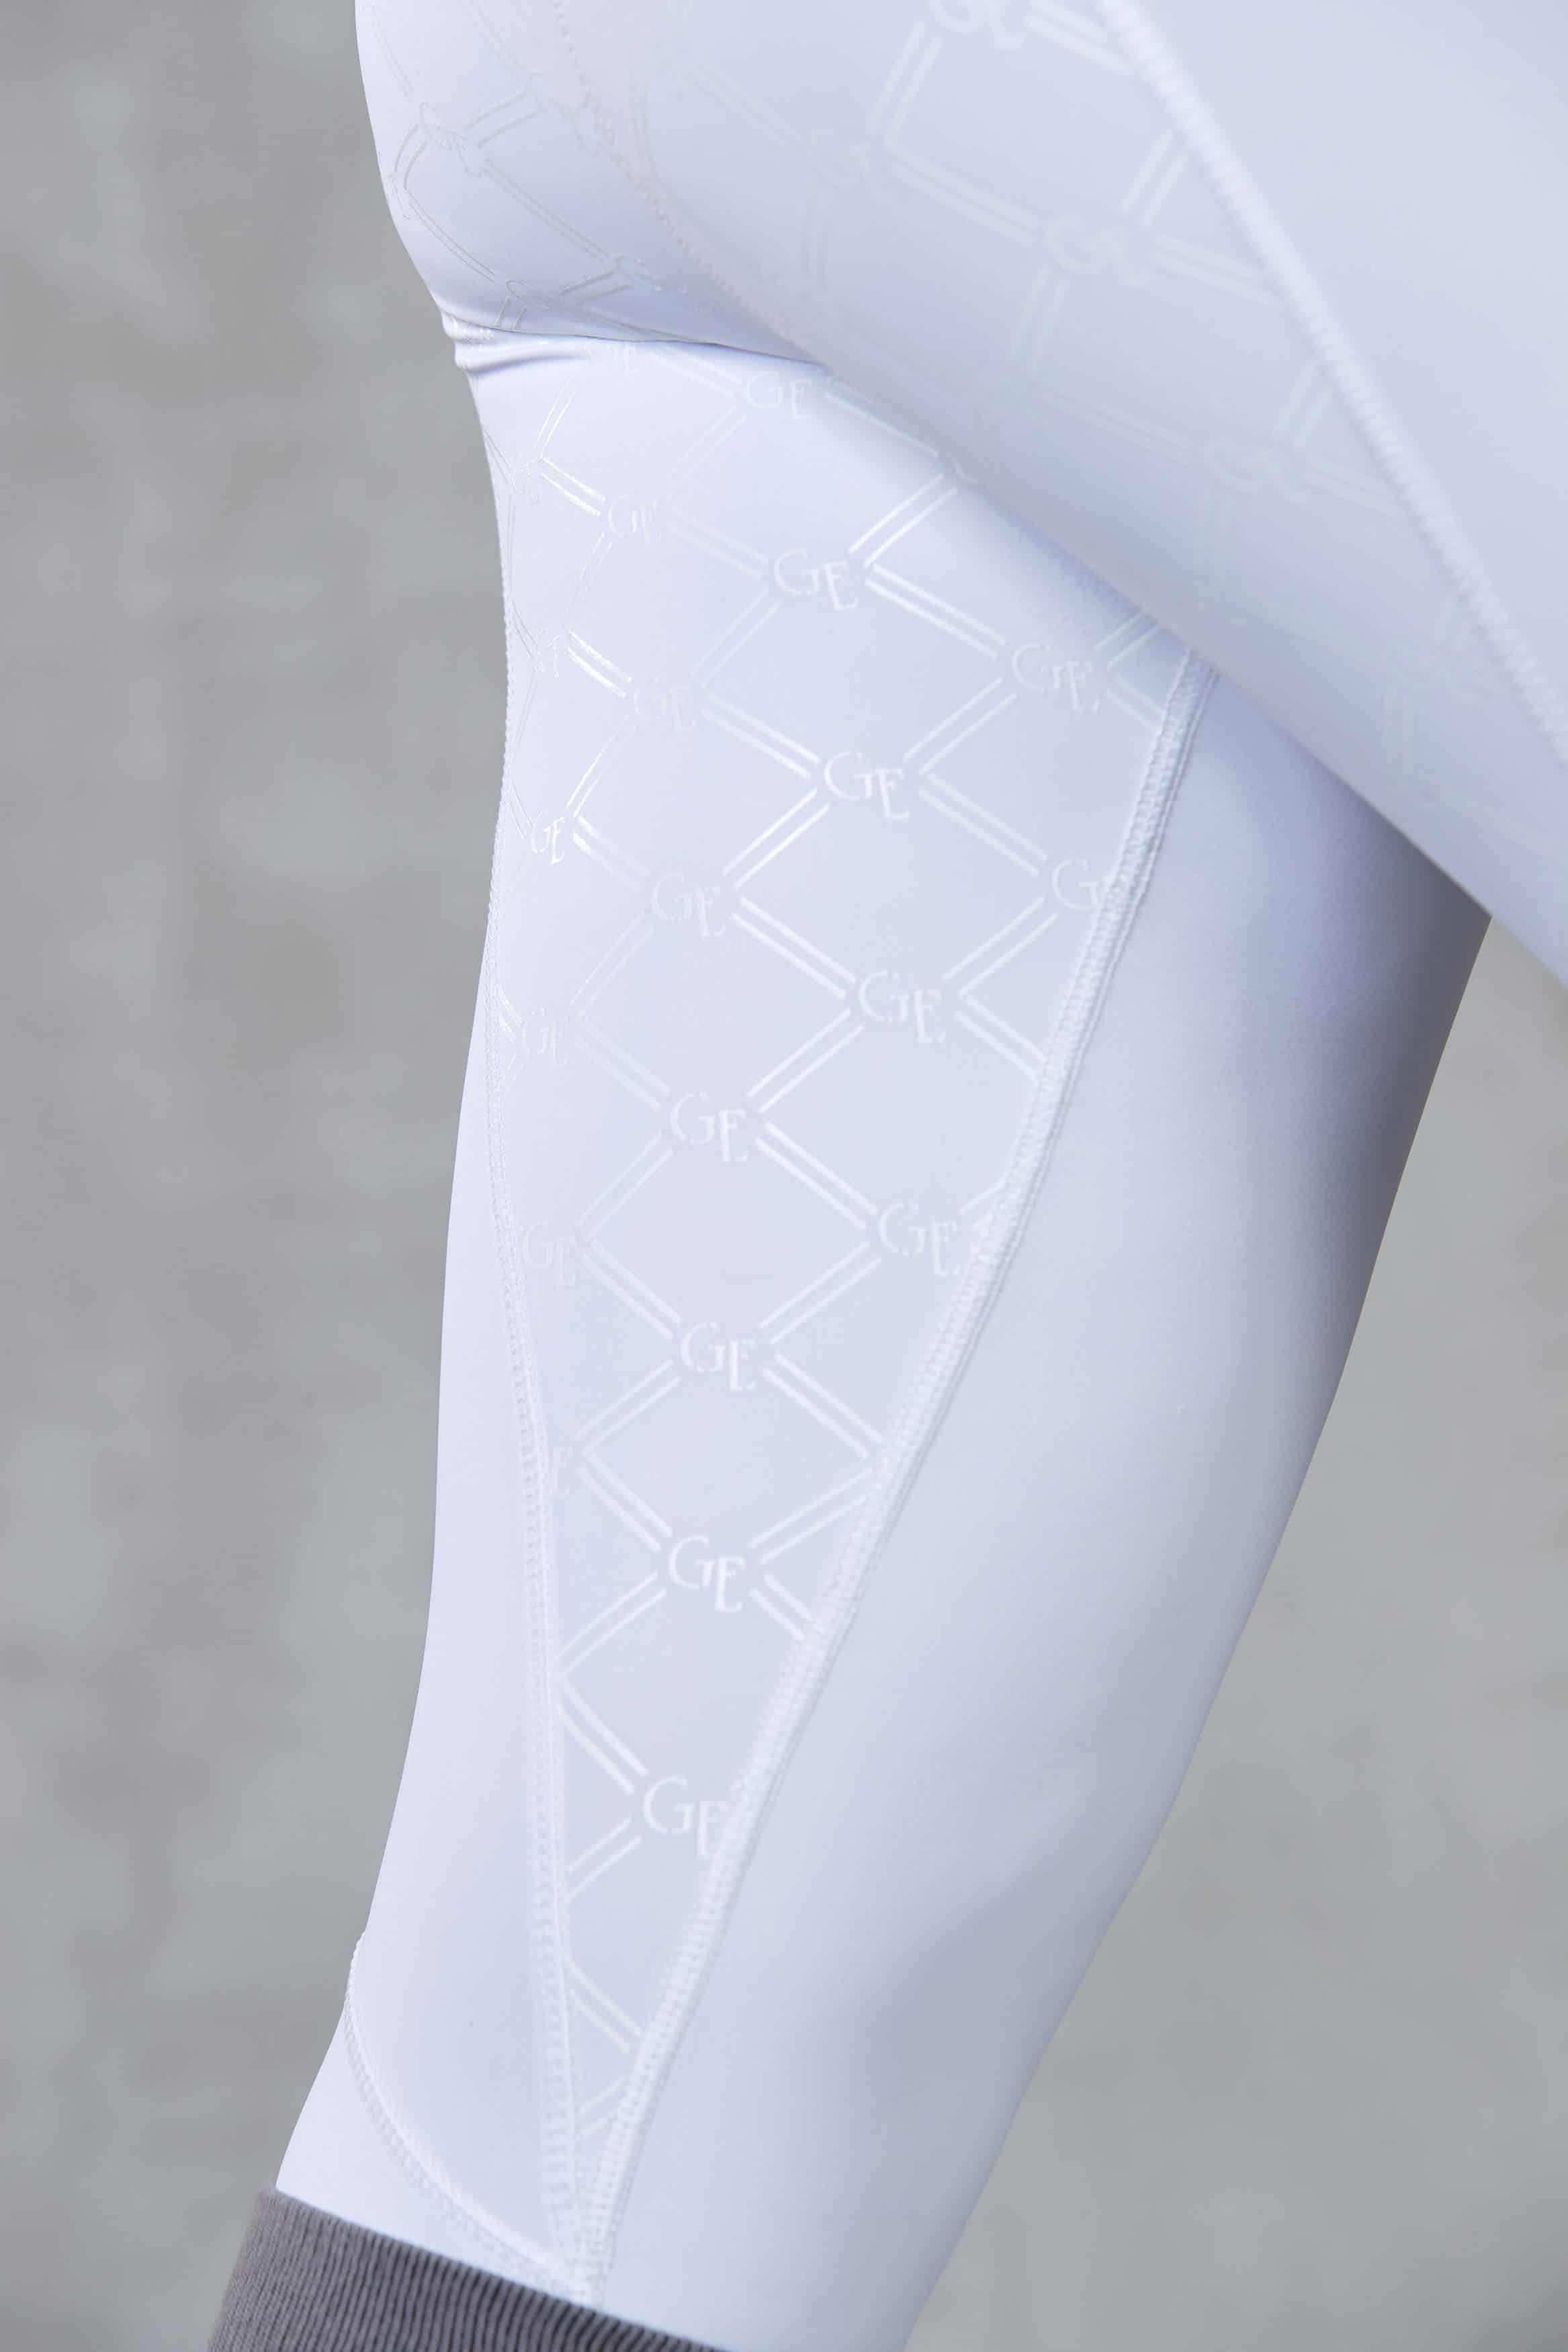 A close up of the white full non slip seat on our childrens competition leggings.